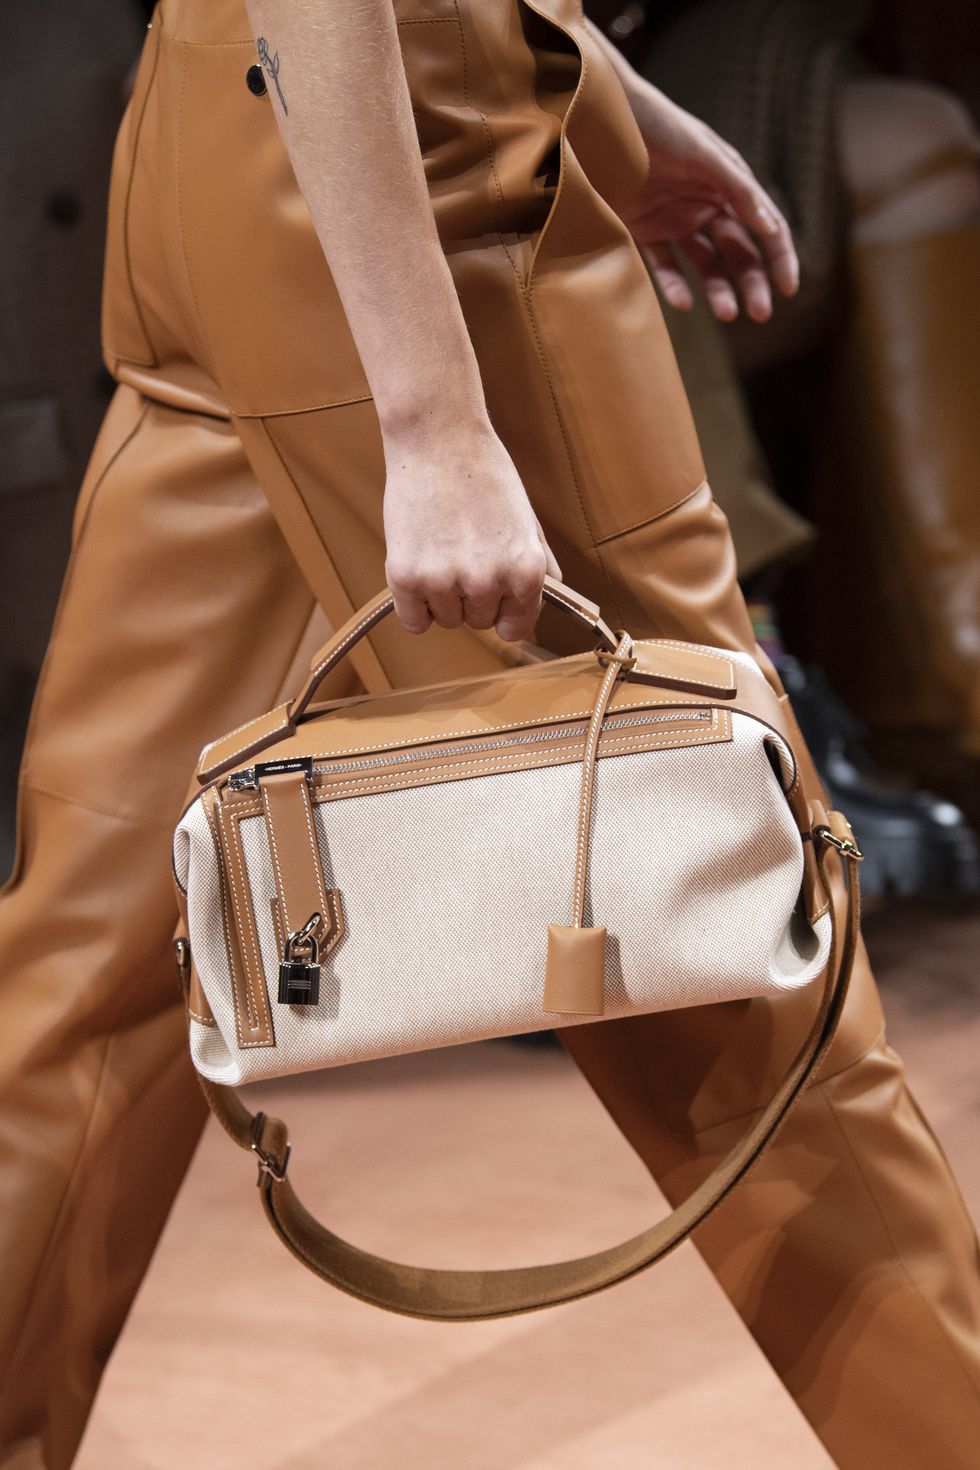 Top Bag Trends of 2020, Best New Bags of the Year